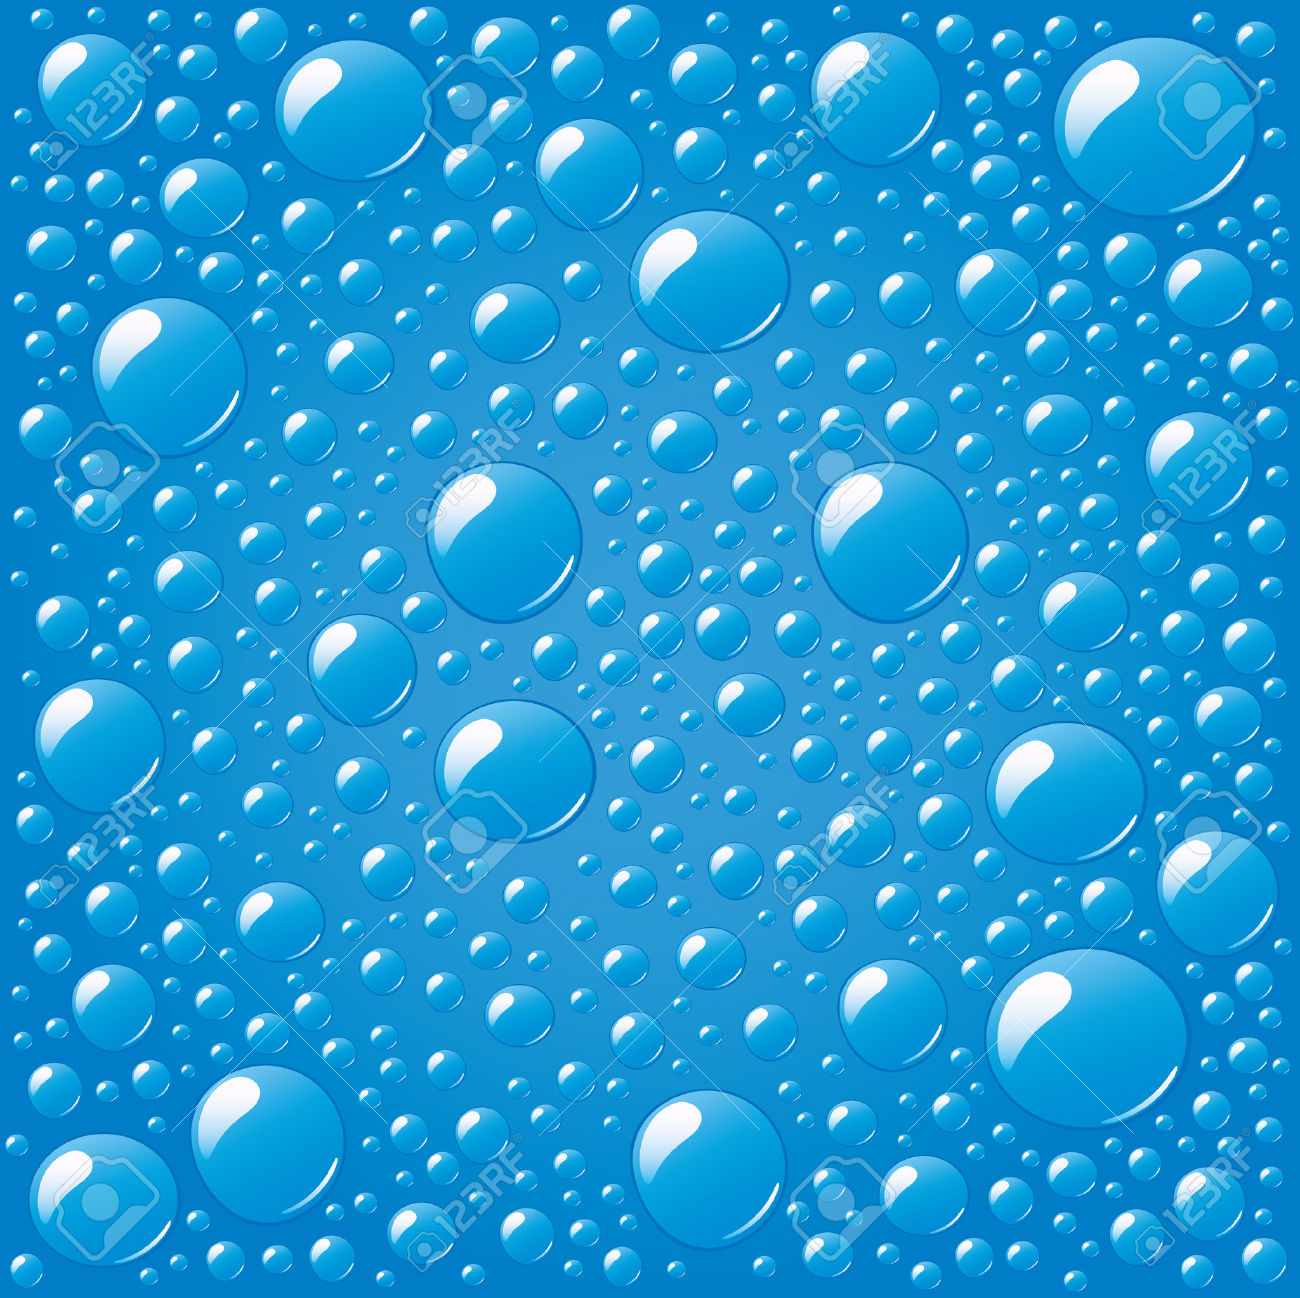 Free water background.